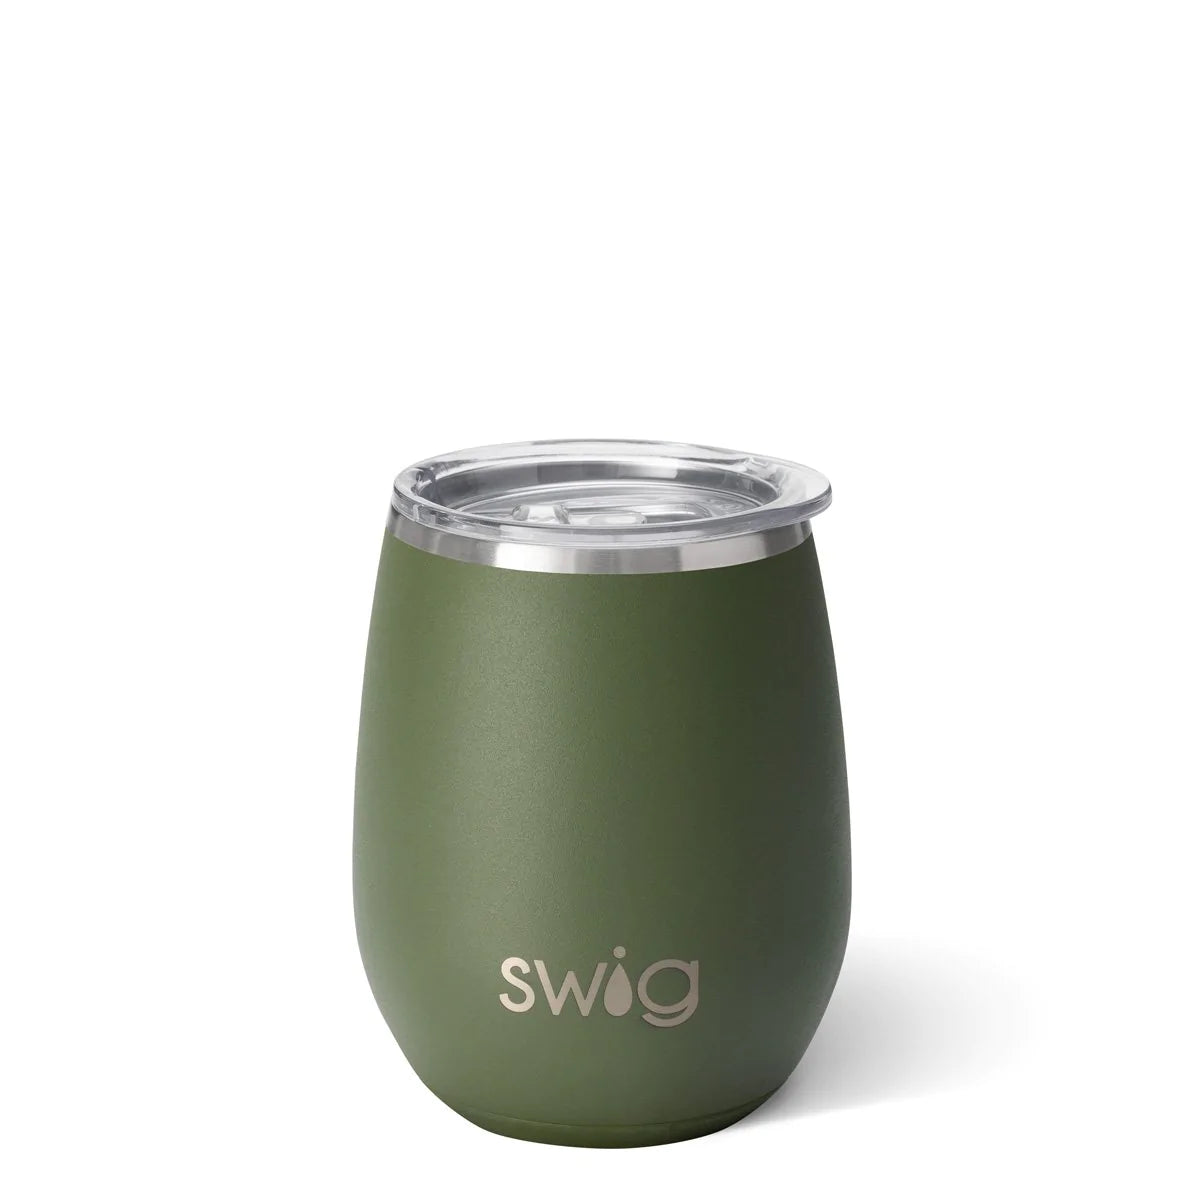 Stemless Wine Cup - Olive